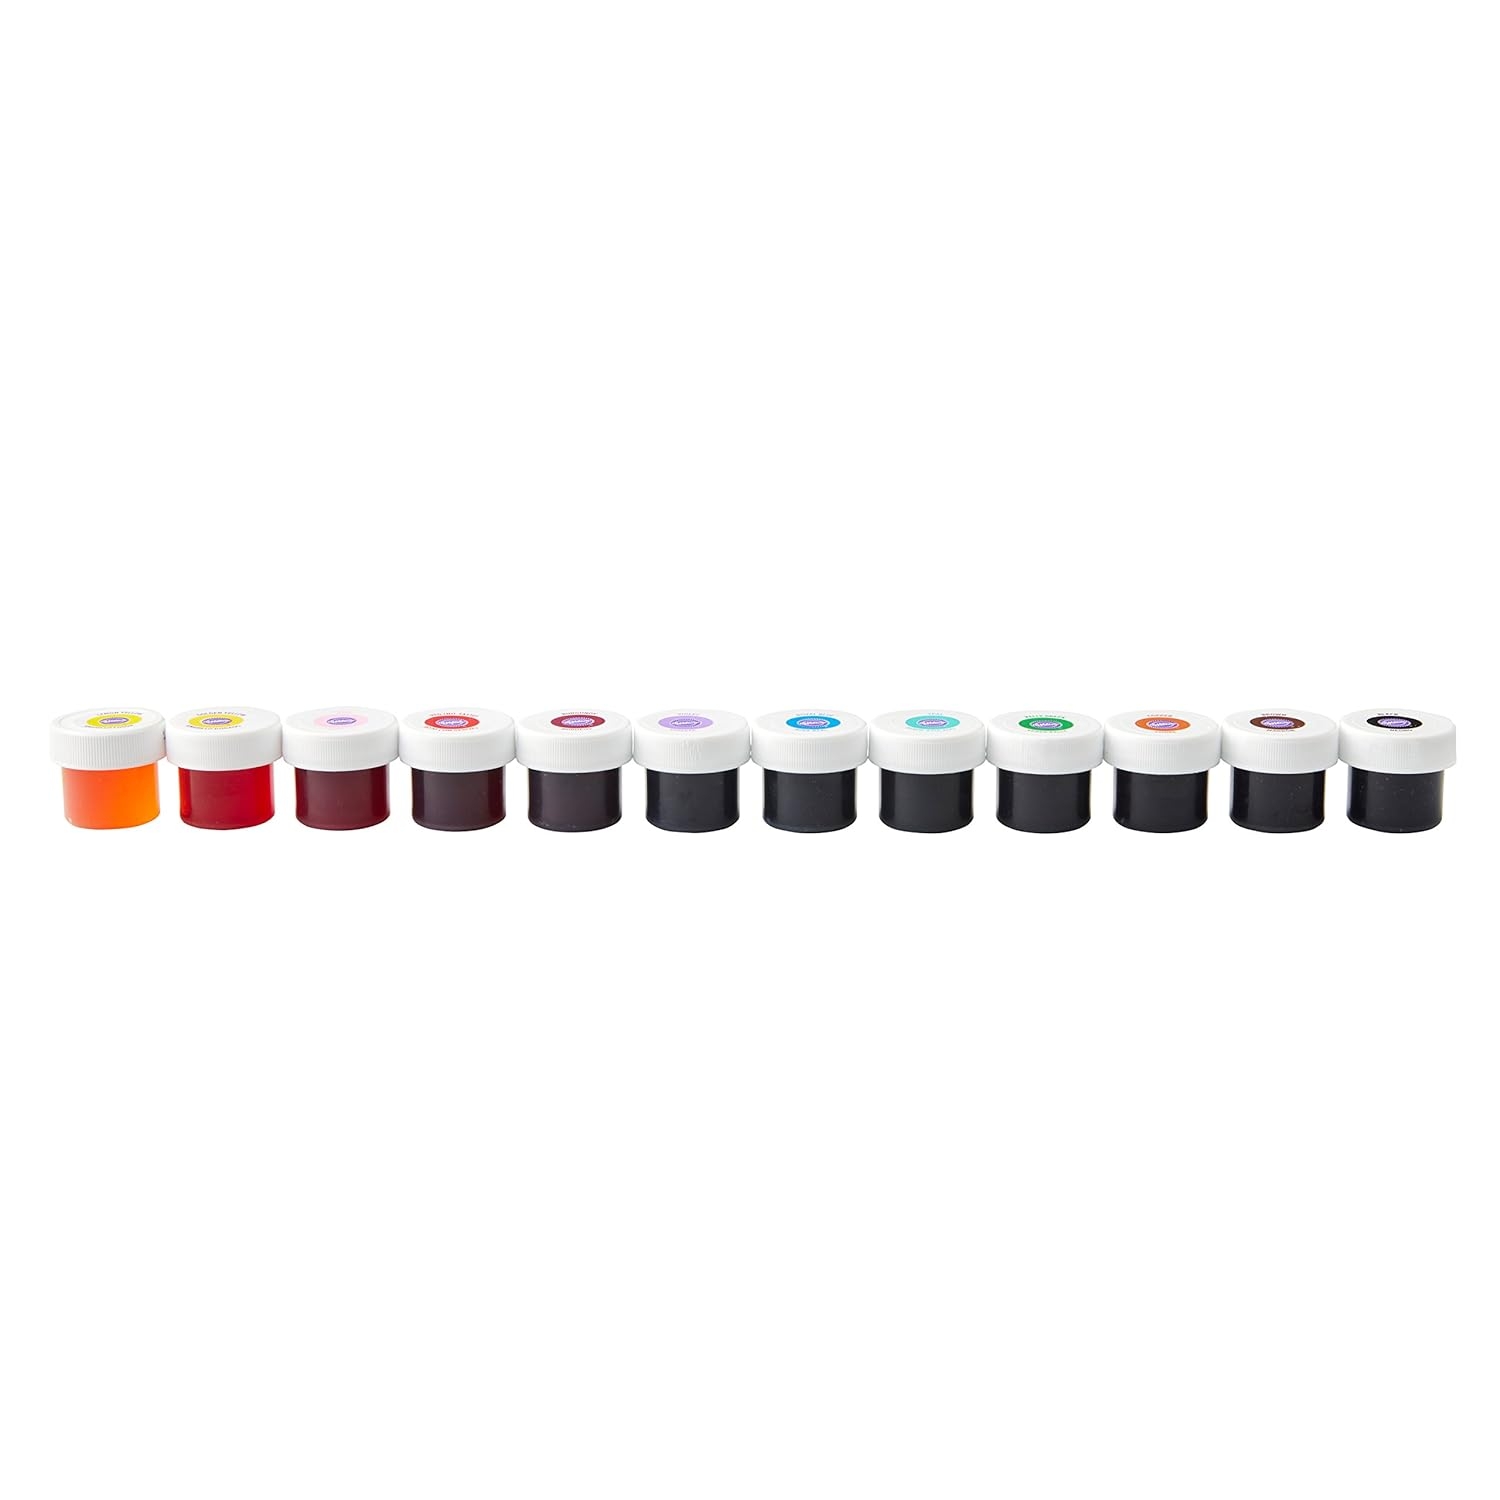 Wilton Icing Colors, 12-Count Gel-Based Food Color